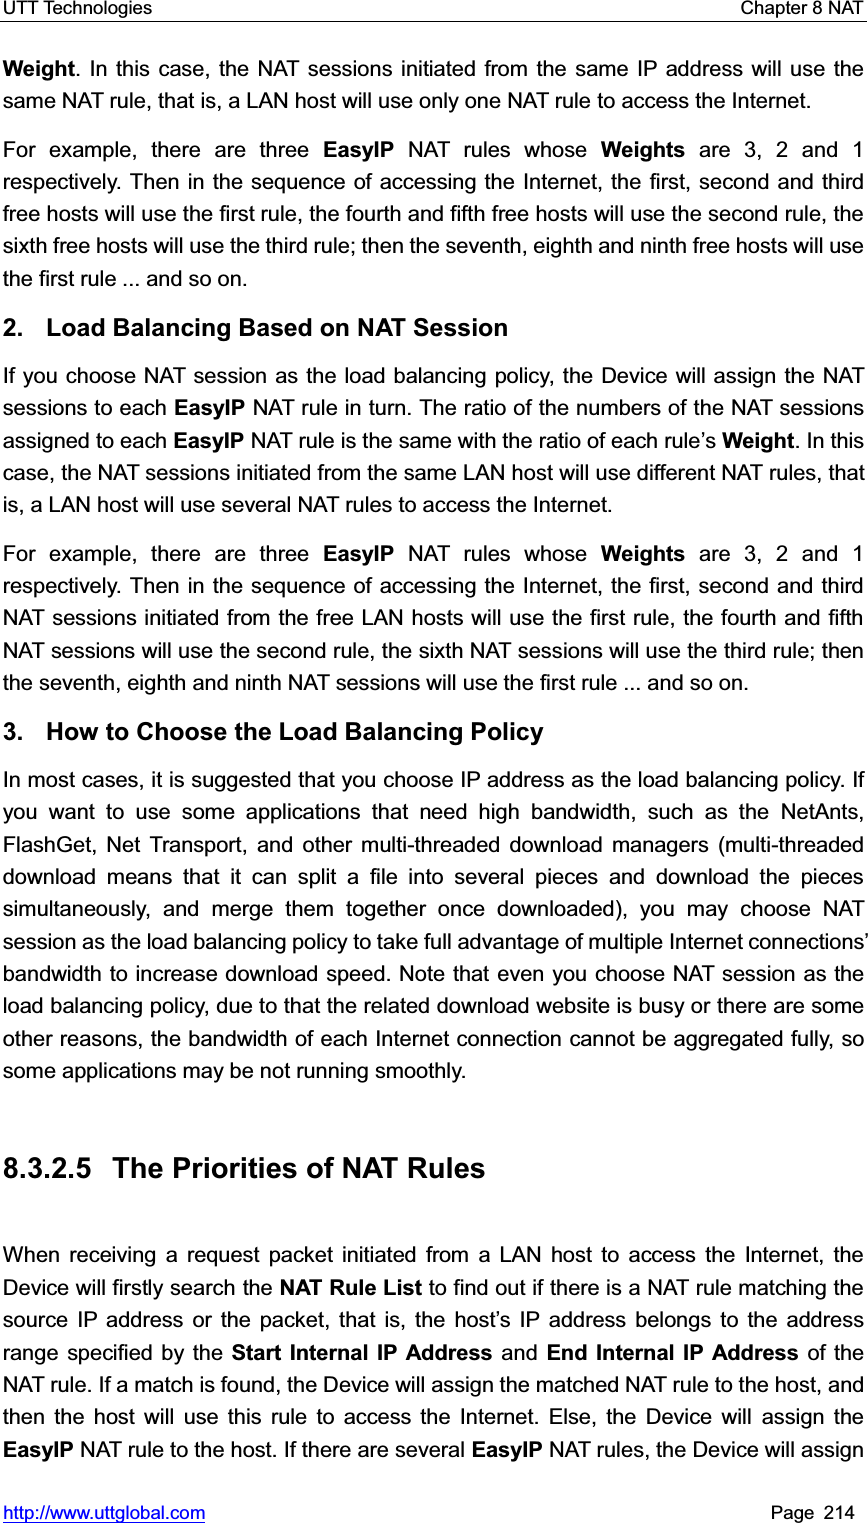 UTT Technologies    Chapter 8 NAT   http://www.uttglobal.com Page 214 Weight. In this case, the NAT sessions initiated from the same IP address will use the same NAT rule, that is, a LAN host will use only one NAT rule to access the Internet.   For example, there are three EasyIP NAT rules whose Weights are 3, 2 and 1 respectively. Then in the sequence of accessing the Internet, the first, second and third free hosts will use the first rule, the fourth and fifth free hosts will use the second rule, the sixth free hosts will use the third rule; then the seventh, eighth and ninth free hosts will usethe first rule ... and so on. 2.  Load Balancing Based on NAT Session If you choose NAT session as the load balancing policy, the Device will assign the NAT sessions to each EasyIP NAT rule in turn. The ratio of the numbers of the NAT sessionsassigned to each EasyIP NAT rule is the same with the ratio of each rule¶sWeight. In this case, the NAT sessions initiated from the same LAN host will use different NAT rules, that is, a LAN host will use several NAT rules to access the Internet. For example, there are three EasyIP NAT rules whose Weights are 3, 2 and 1 respectively. Then in the sequence of accessing the Internet, the first, second and third NAT sessions initiated from the free LAN hosts will use the first rule, the fourth and fifth NAT sessions will use the second rule, the sixth NAT sessions will use the third rule; thenthe seventh, eighth and ninth NAT sessions will use the first rule ... and so on. 3.  How to Choose the Load Balancing Policy In most cases, it is suggested that you choose IP address as the load balancing policy. If you want to use some applications that need high bandwidth, such as the NetAnts, FlashGet, Net Transport, and other multi-threaded download managers (multi-threaded download means that it can split a file into several pieces and download the pieces simultaneously, and merge them together once downloaded), you may choose NAT session as the load balancing policy to take full advantage of multiple Internet connections¶bandwidth to increase download speed. Note that even you choose NAT session as the load balancing policy, due to that the related download website is busy or there are some other reasons, the bandwidth of each Internet connection cannot be aggregated fully, so some applications may be not running smoothly. 8.3.2.5  The Priorities of NAT Rules When receiving a request packet initiated from a LAN host to access the Internet, the Device will firstly search the NAT Rule List to find out if there is a NAT rule matching the source IP address or the packet, that is, the host¶s IP address belongs to the address range specified by the Start Internal IP Address and End Internal IP Address of the NAT rule. If a match is found, the Device will assign the matched NAT rule to the host, and then the host will use this rule to access the Internet. Else, the Device will assign the EasyIP NAT rule to the host. If there are several EasyIP NAT rules, the Device will assign 